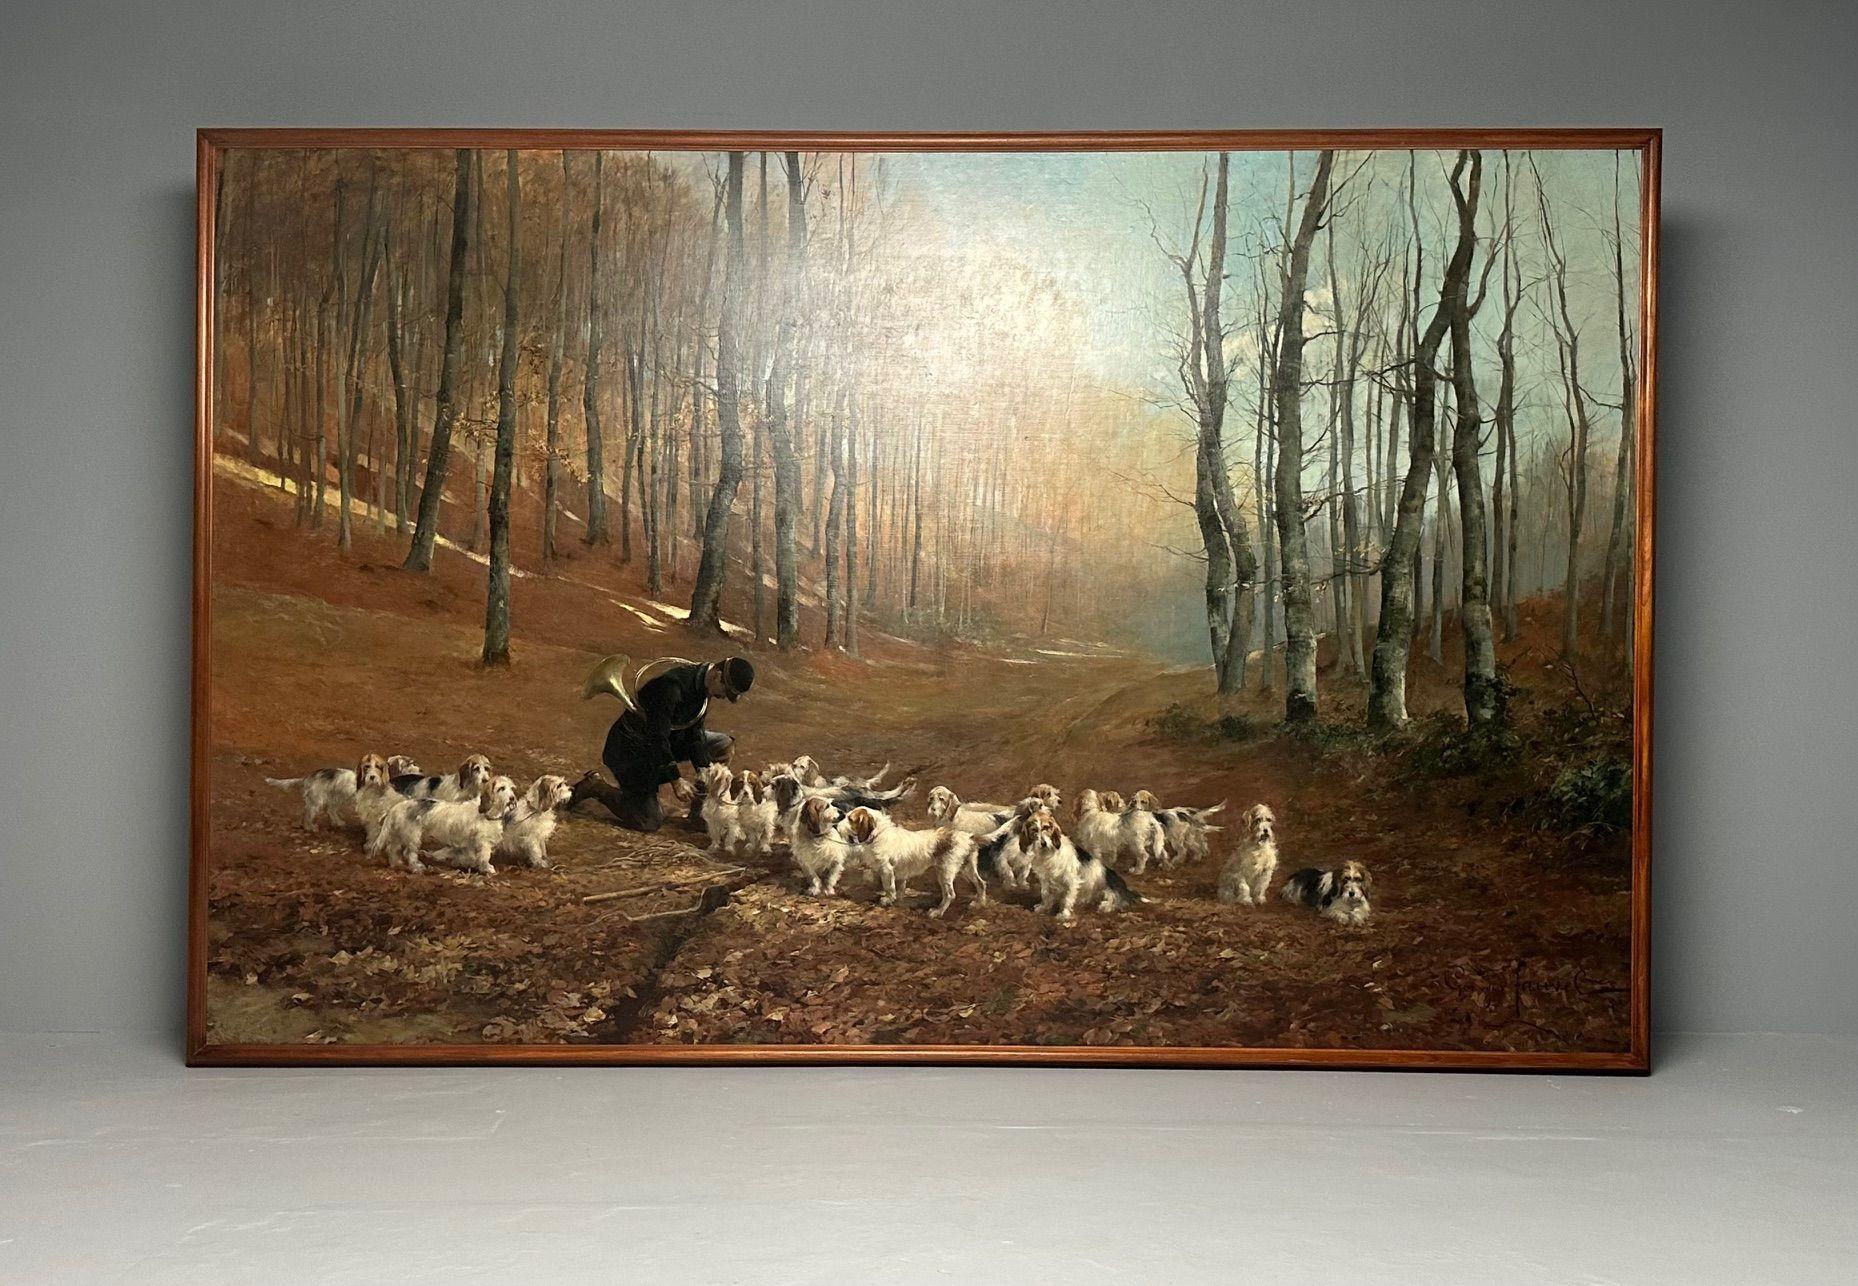 Monumental Oil Canvas, Georges Henri Fauvel, Hunting Dogs with Master, 19th Cent

A very large and impressive painting hanging 139 by 89 inches having a group of finely detailed hunting hounds led by their master in the hunt. 19th century, relined.